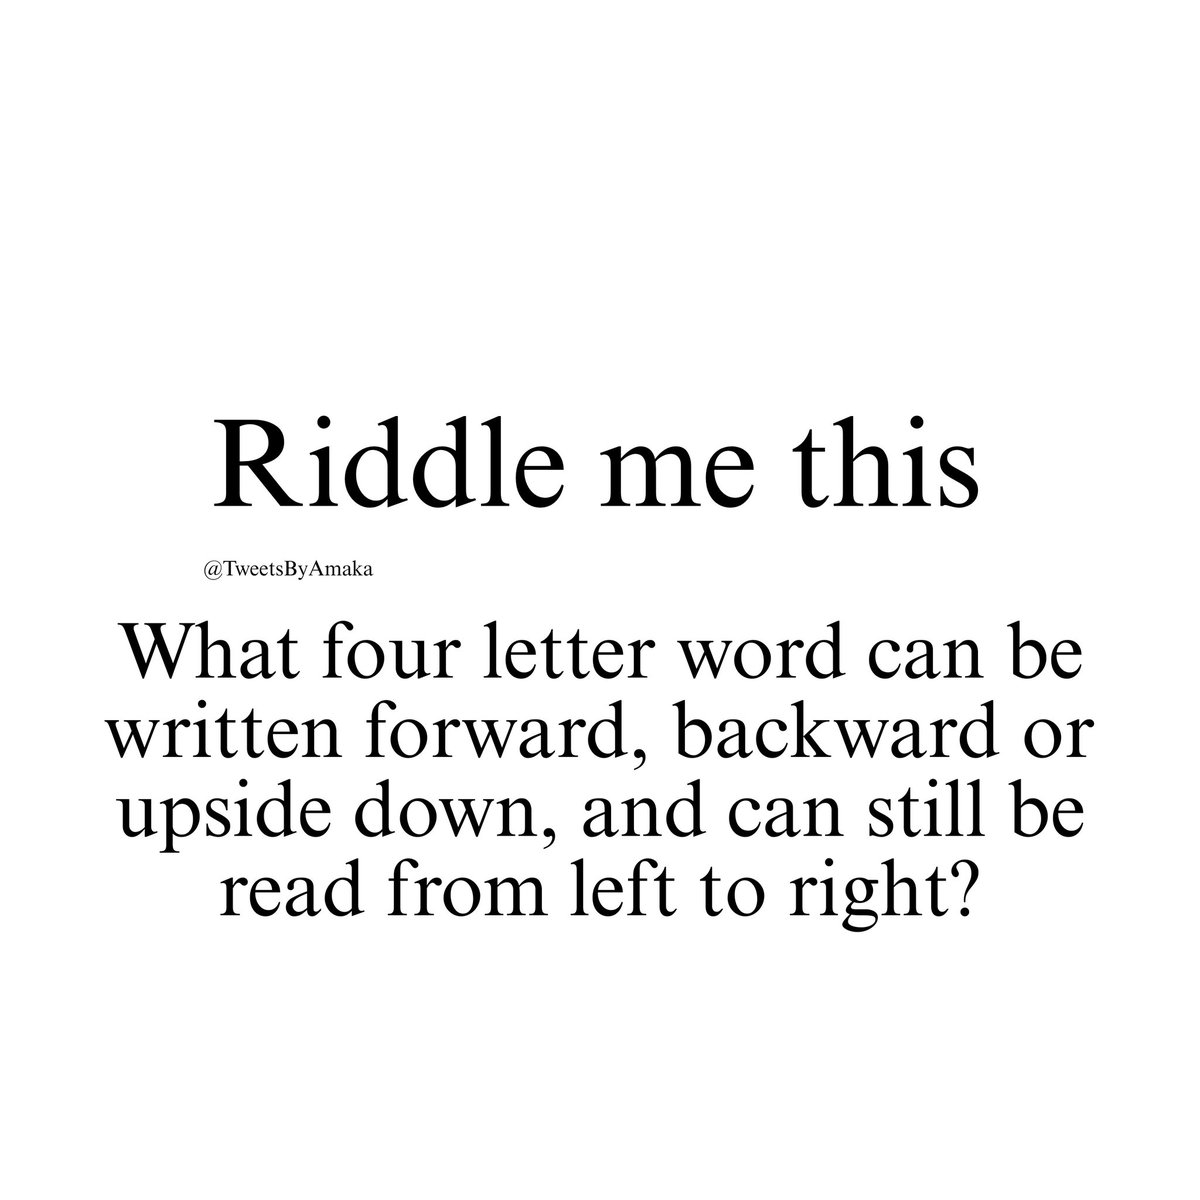 Without Googling, can you guess the word? 
Riddle